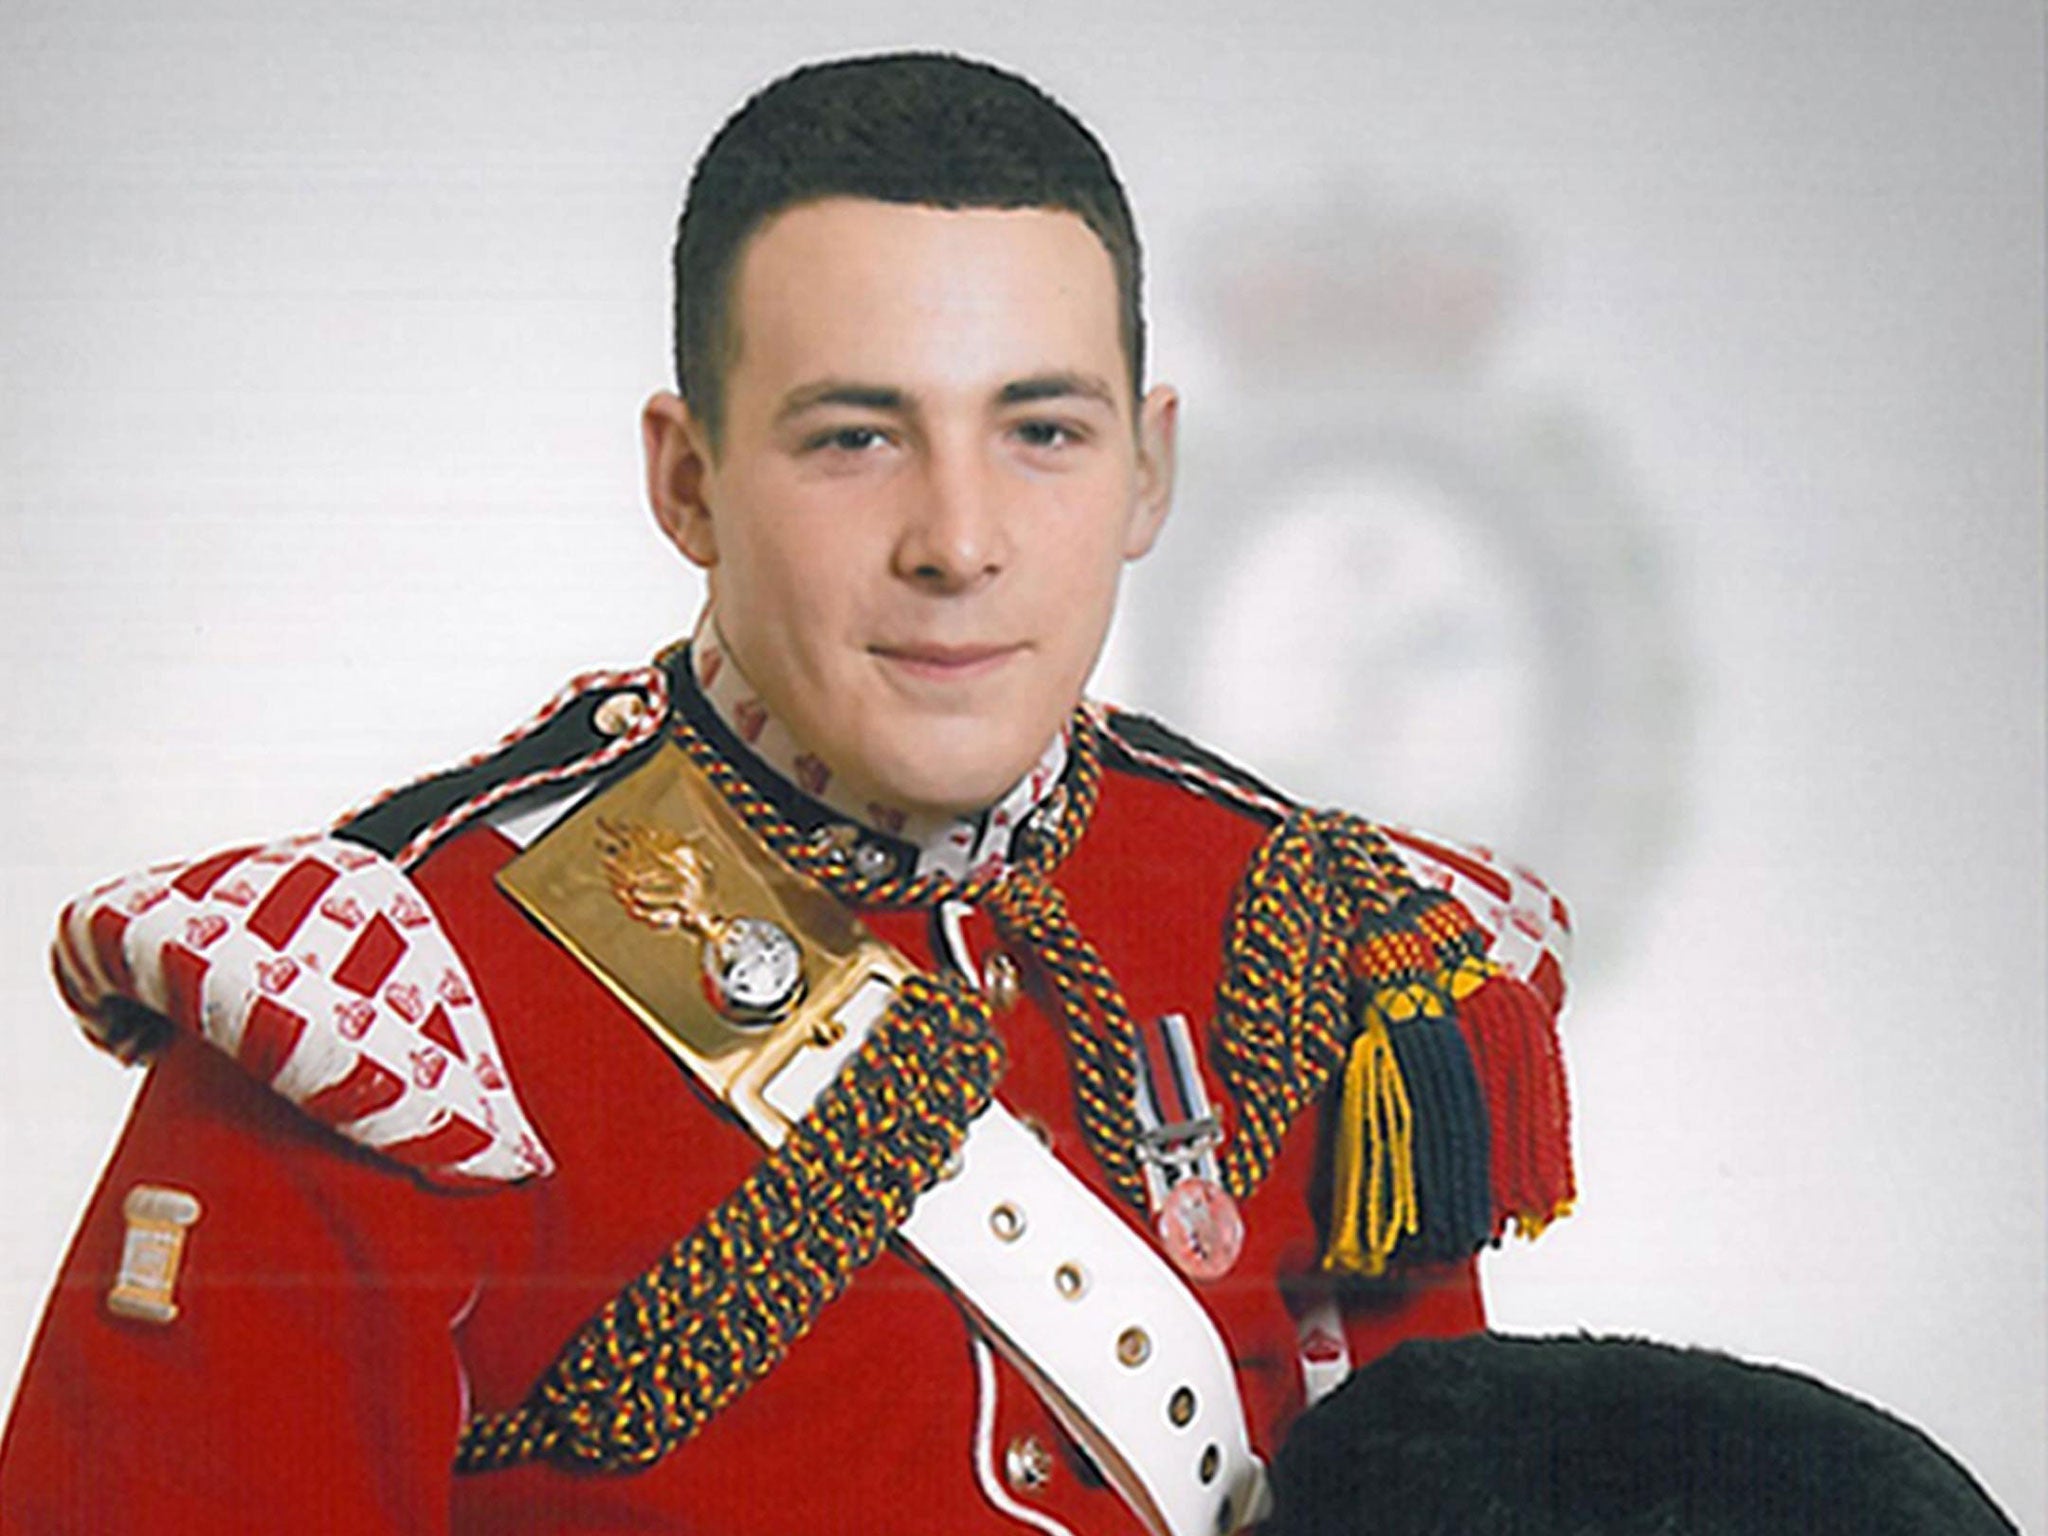 Lee Rigby was murdered in Woolwich, south-east London